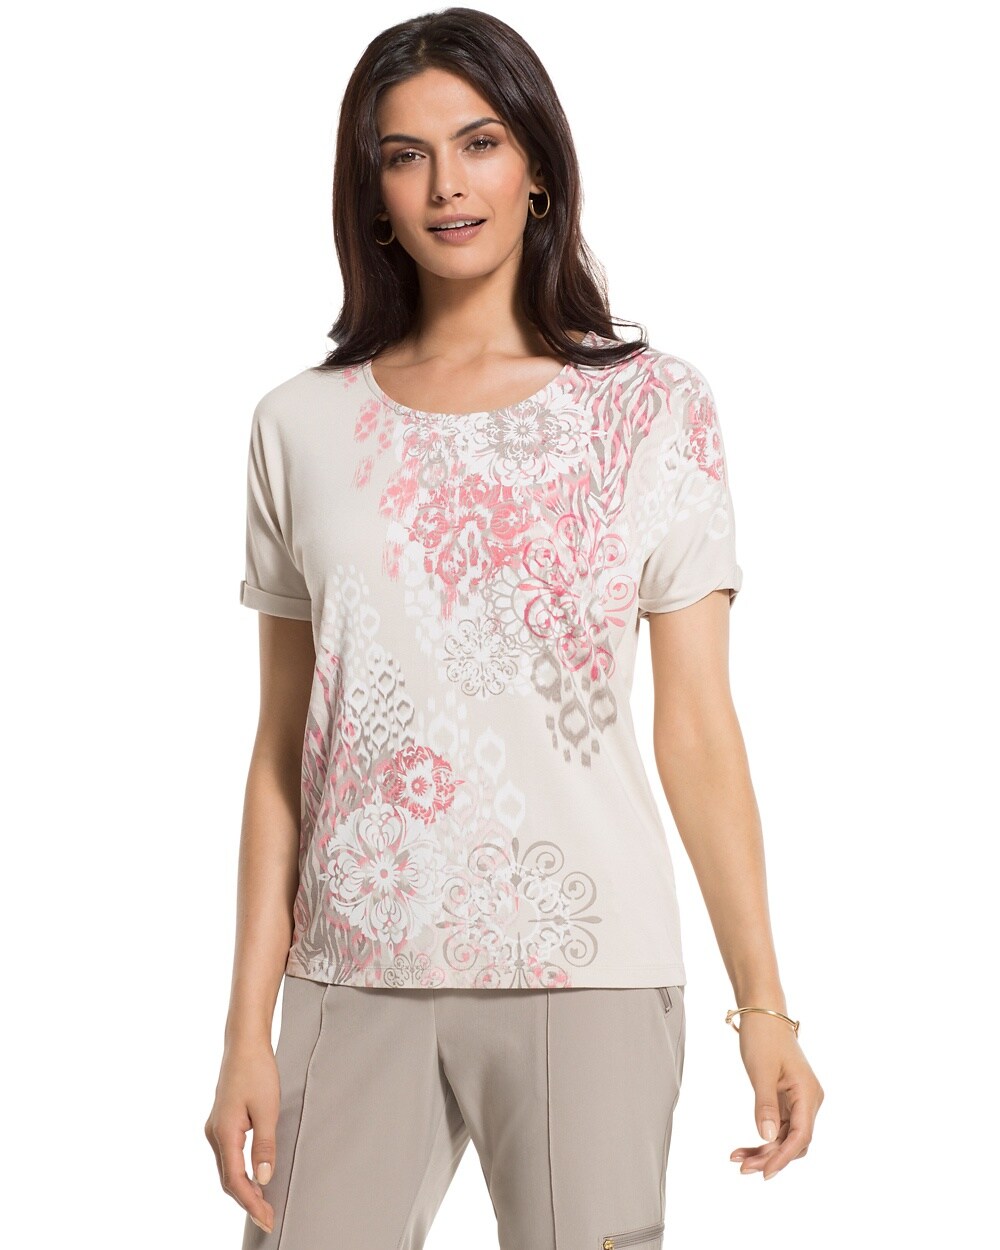 Zenergy Violet Floral-Print Relaxed Tee